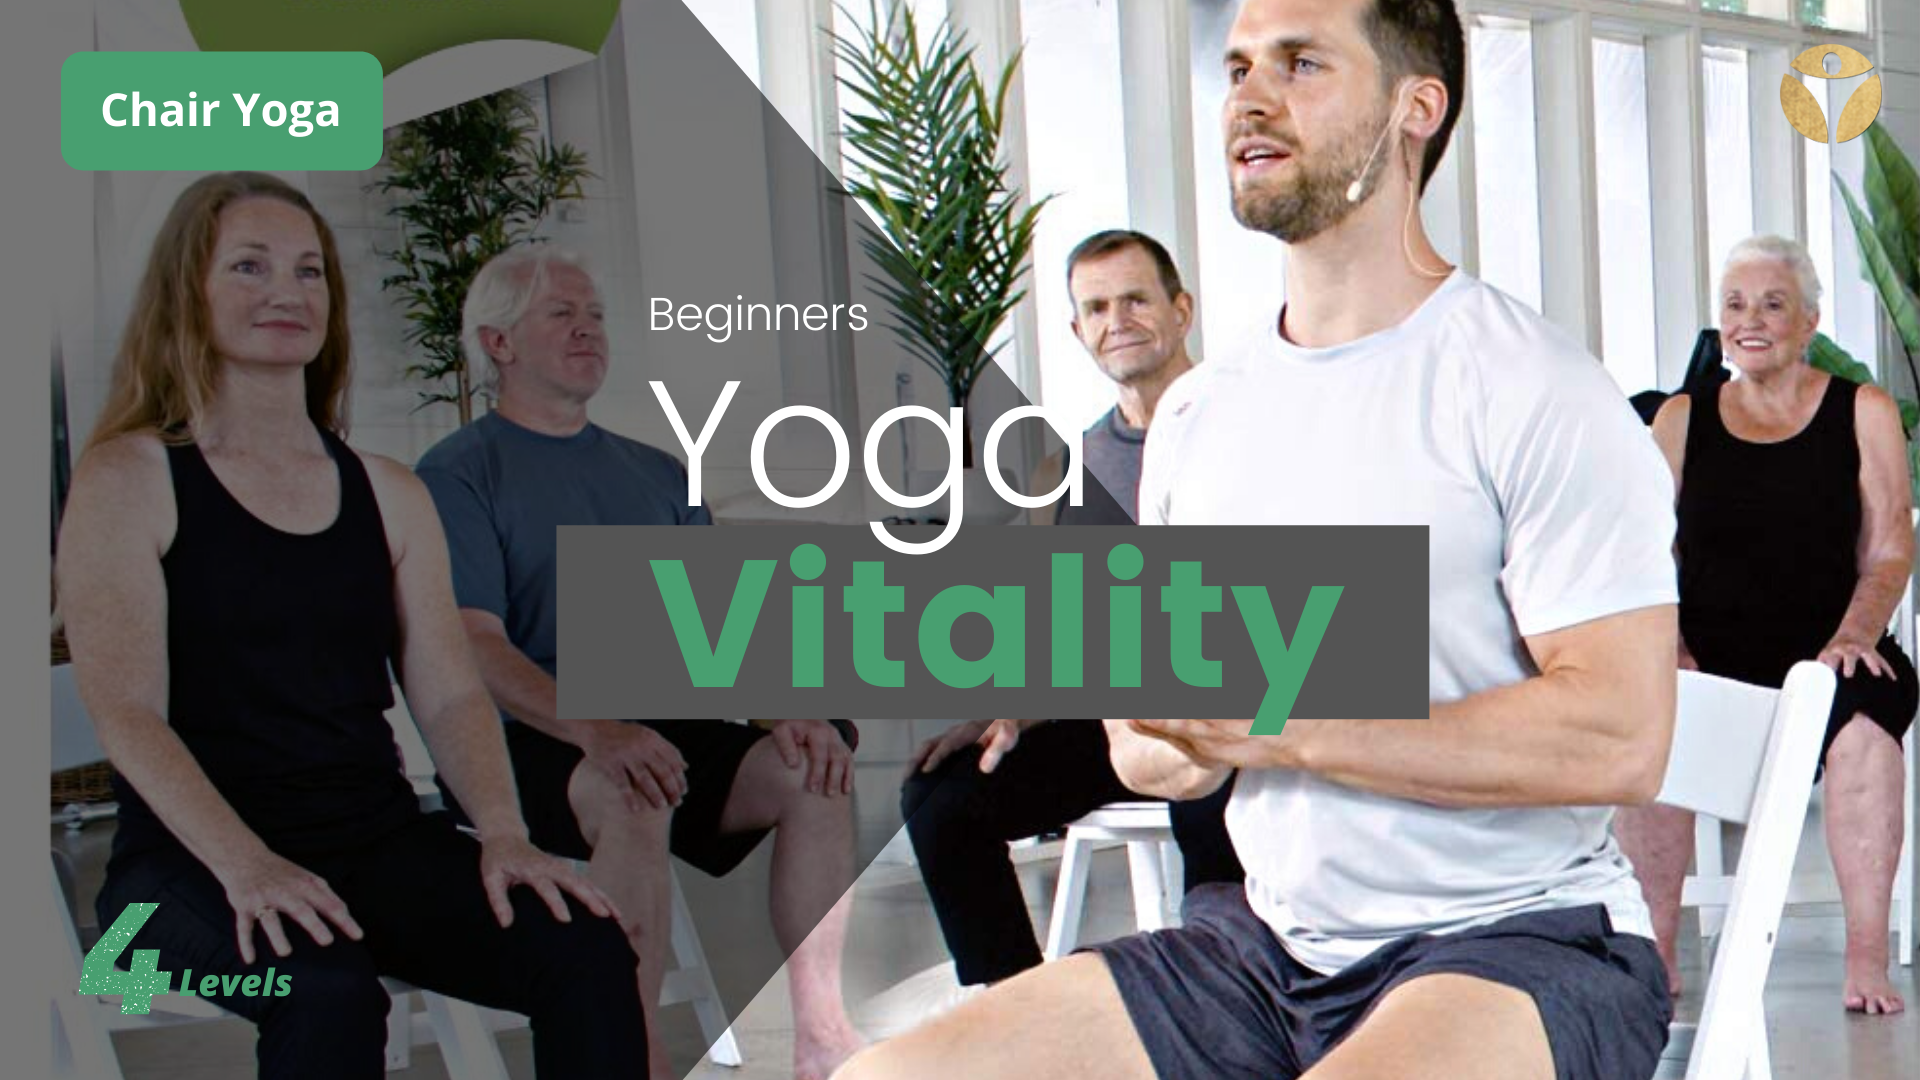  Yoga Vitality - Chair Yoga For Seniors, Older Adults, and  Absolute Beginners, Made For Healthy Aging, Improved Mobility, Joint  Health, Balance, Pain Relief, and Injury Prevention